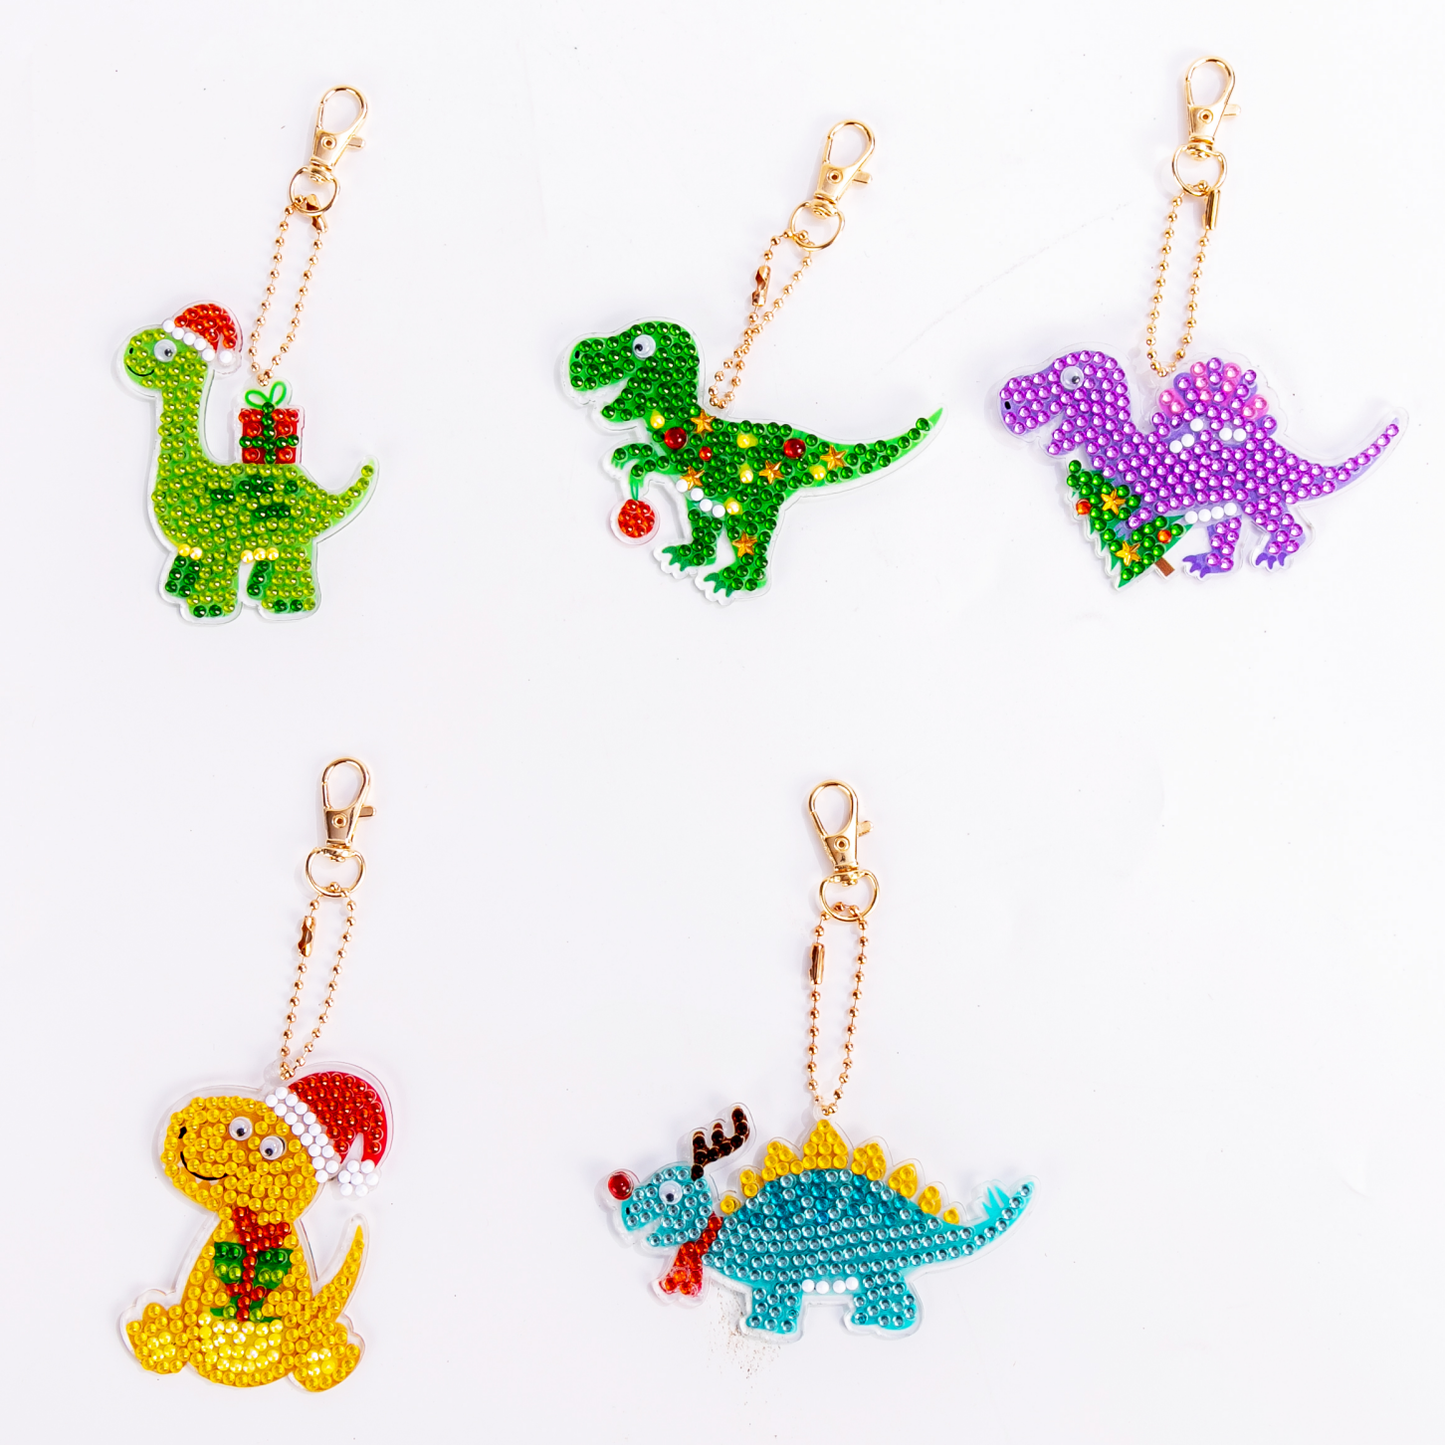 One-sided sticker special diamond painted keychain key ring-Dinosaur